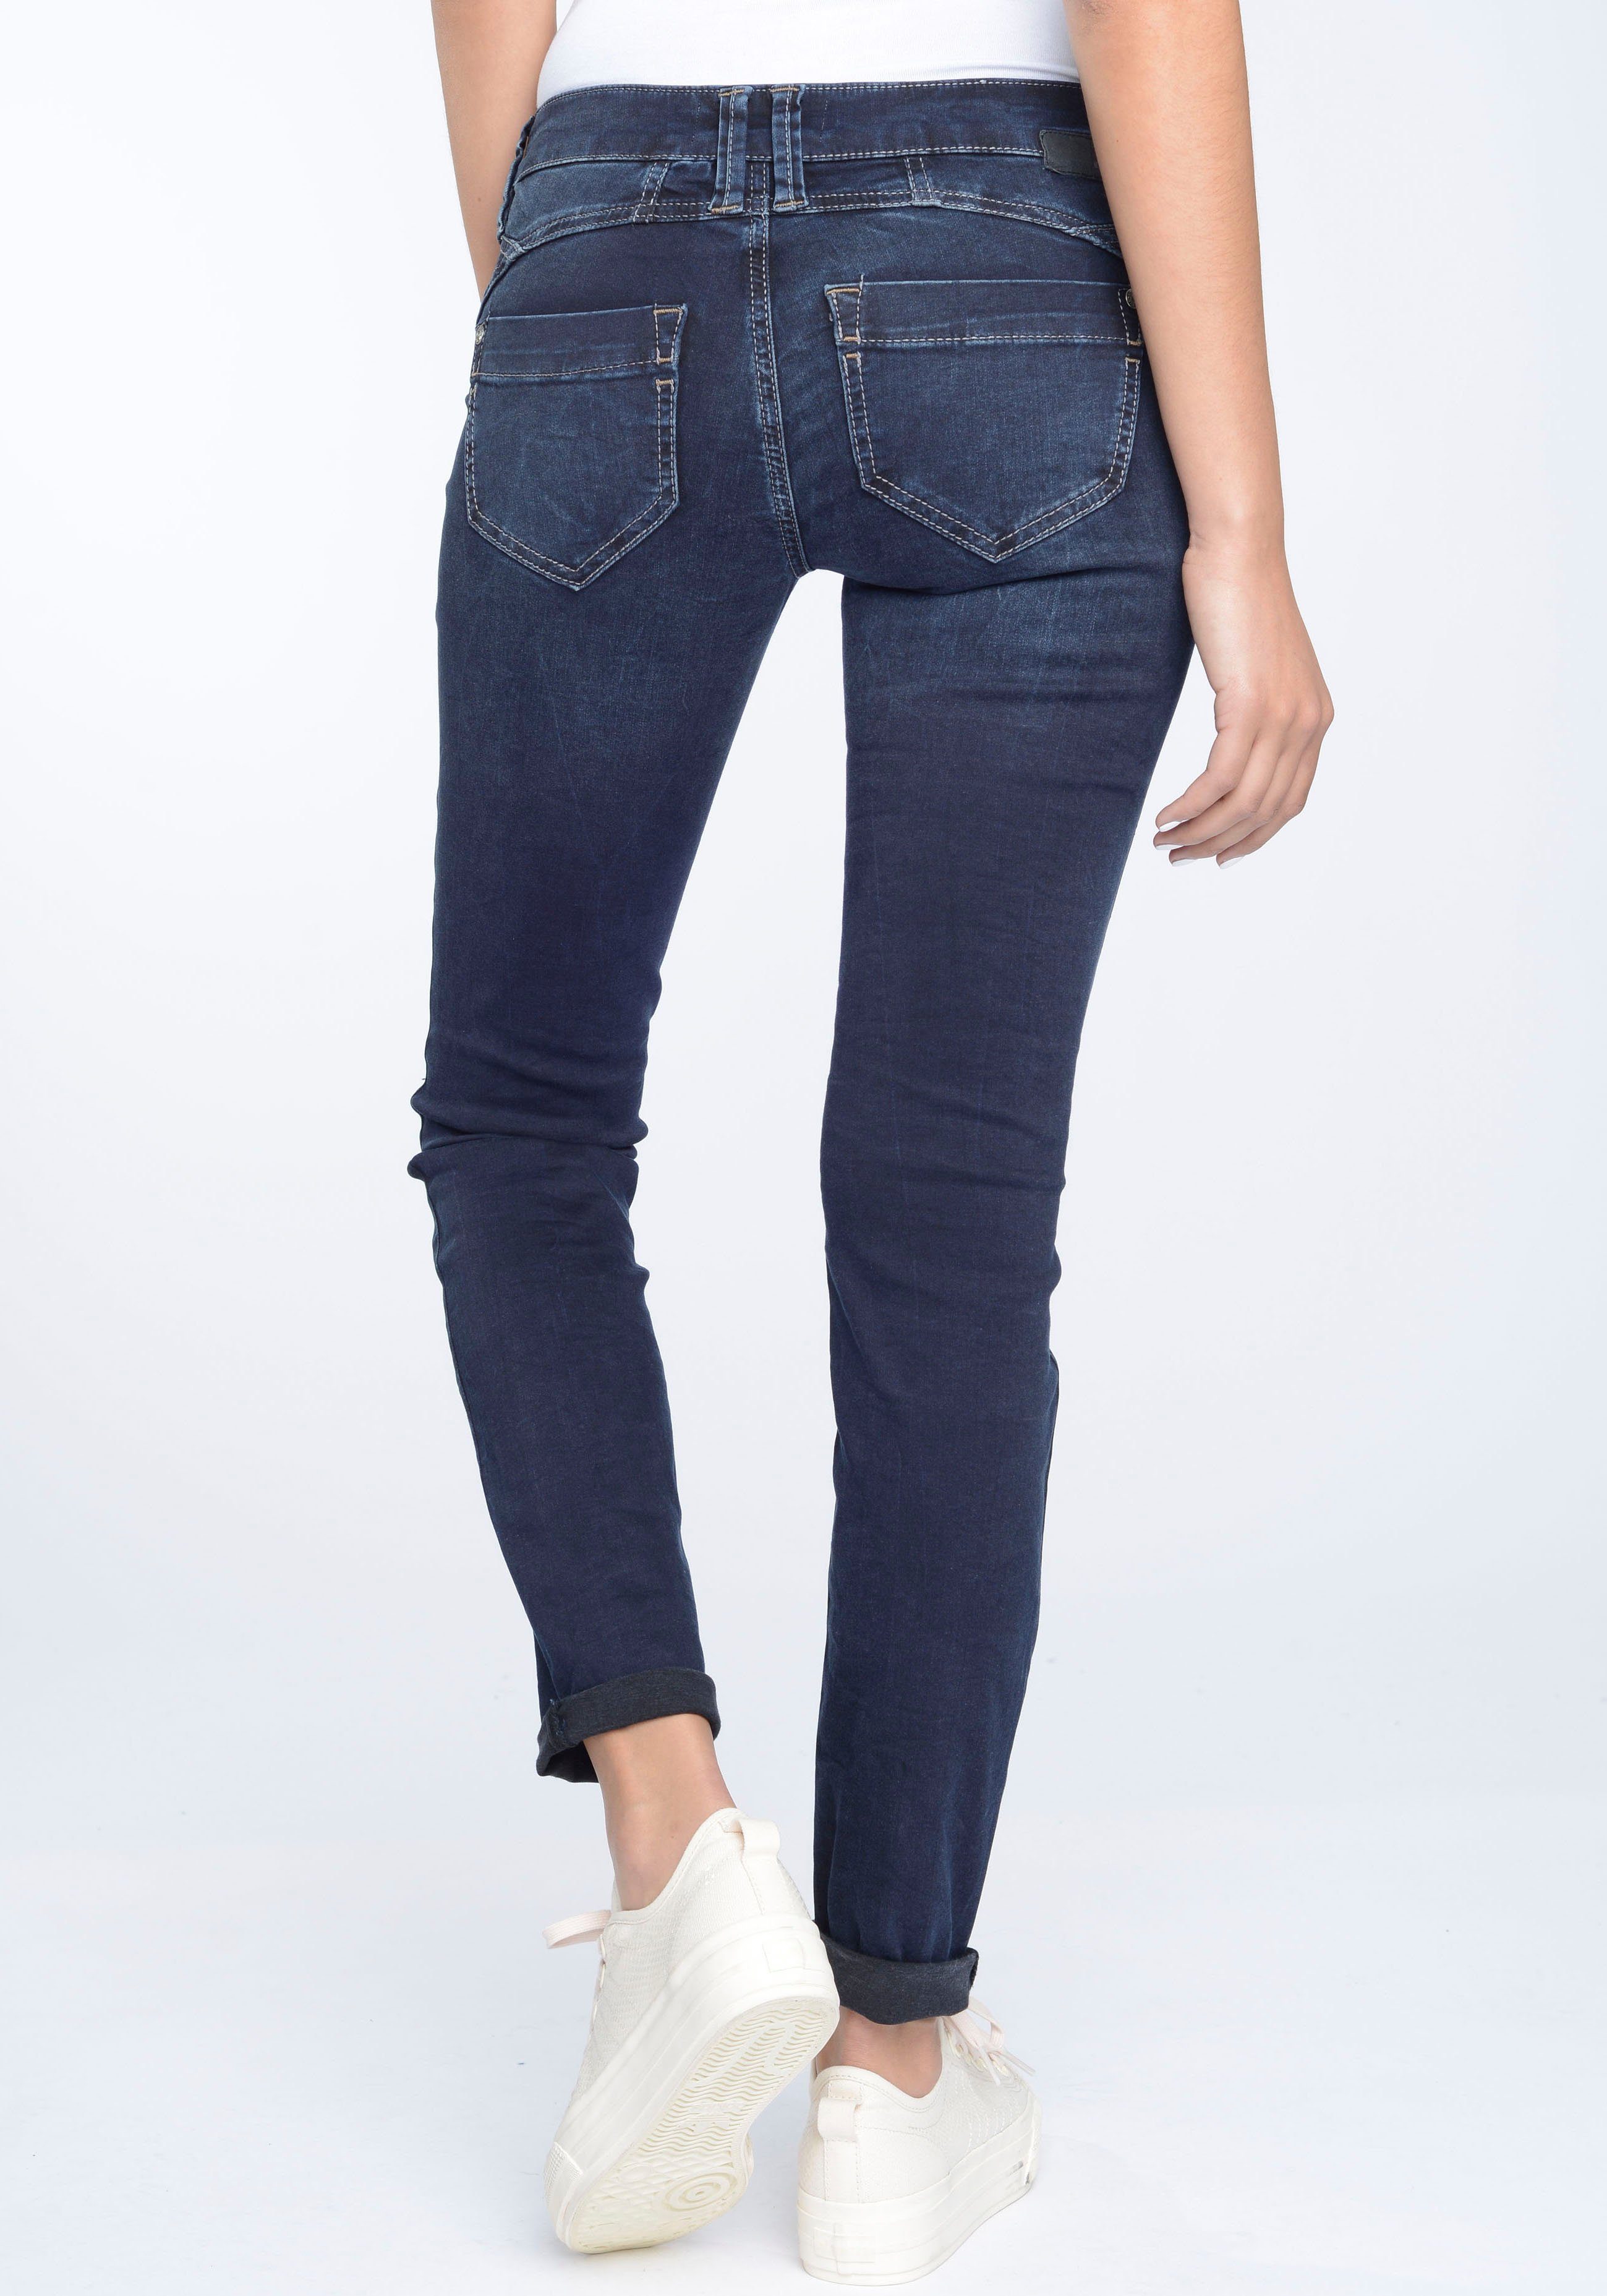 GANG Skinny-fit-Jeans 94Nena in authenischer used Used-Waschung dark